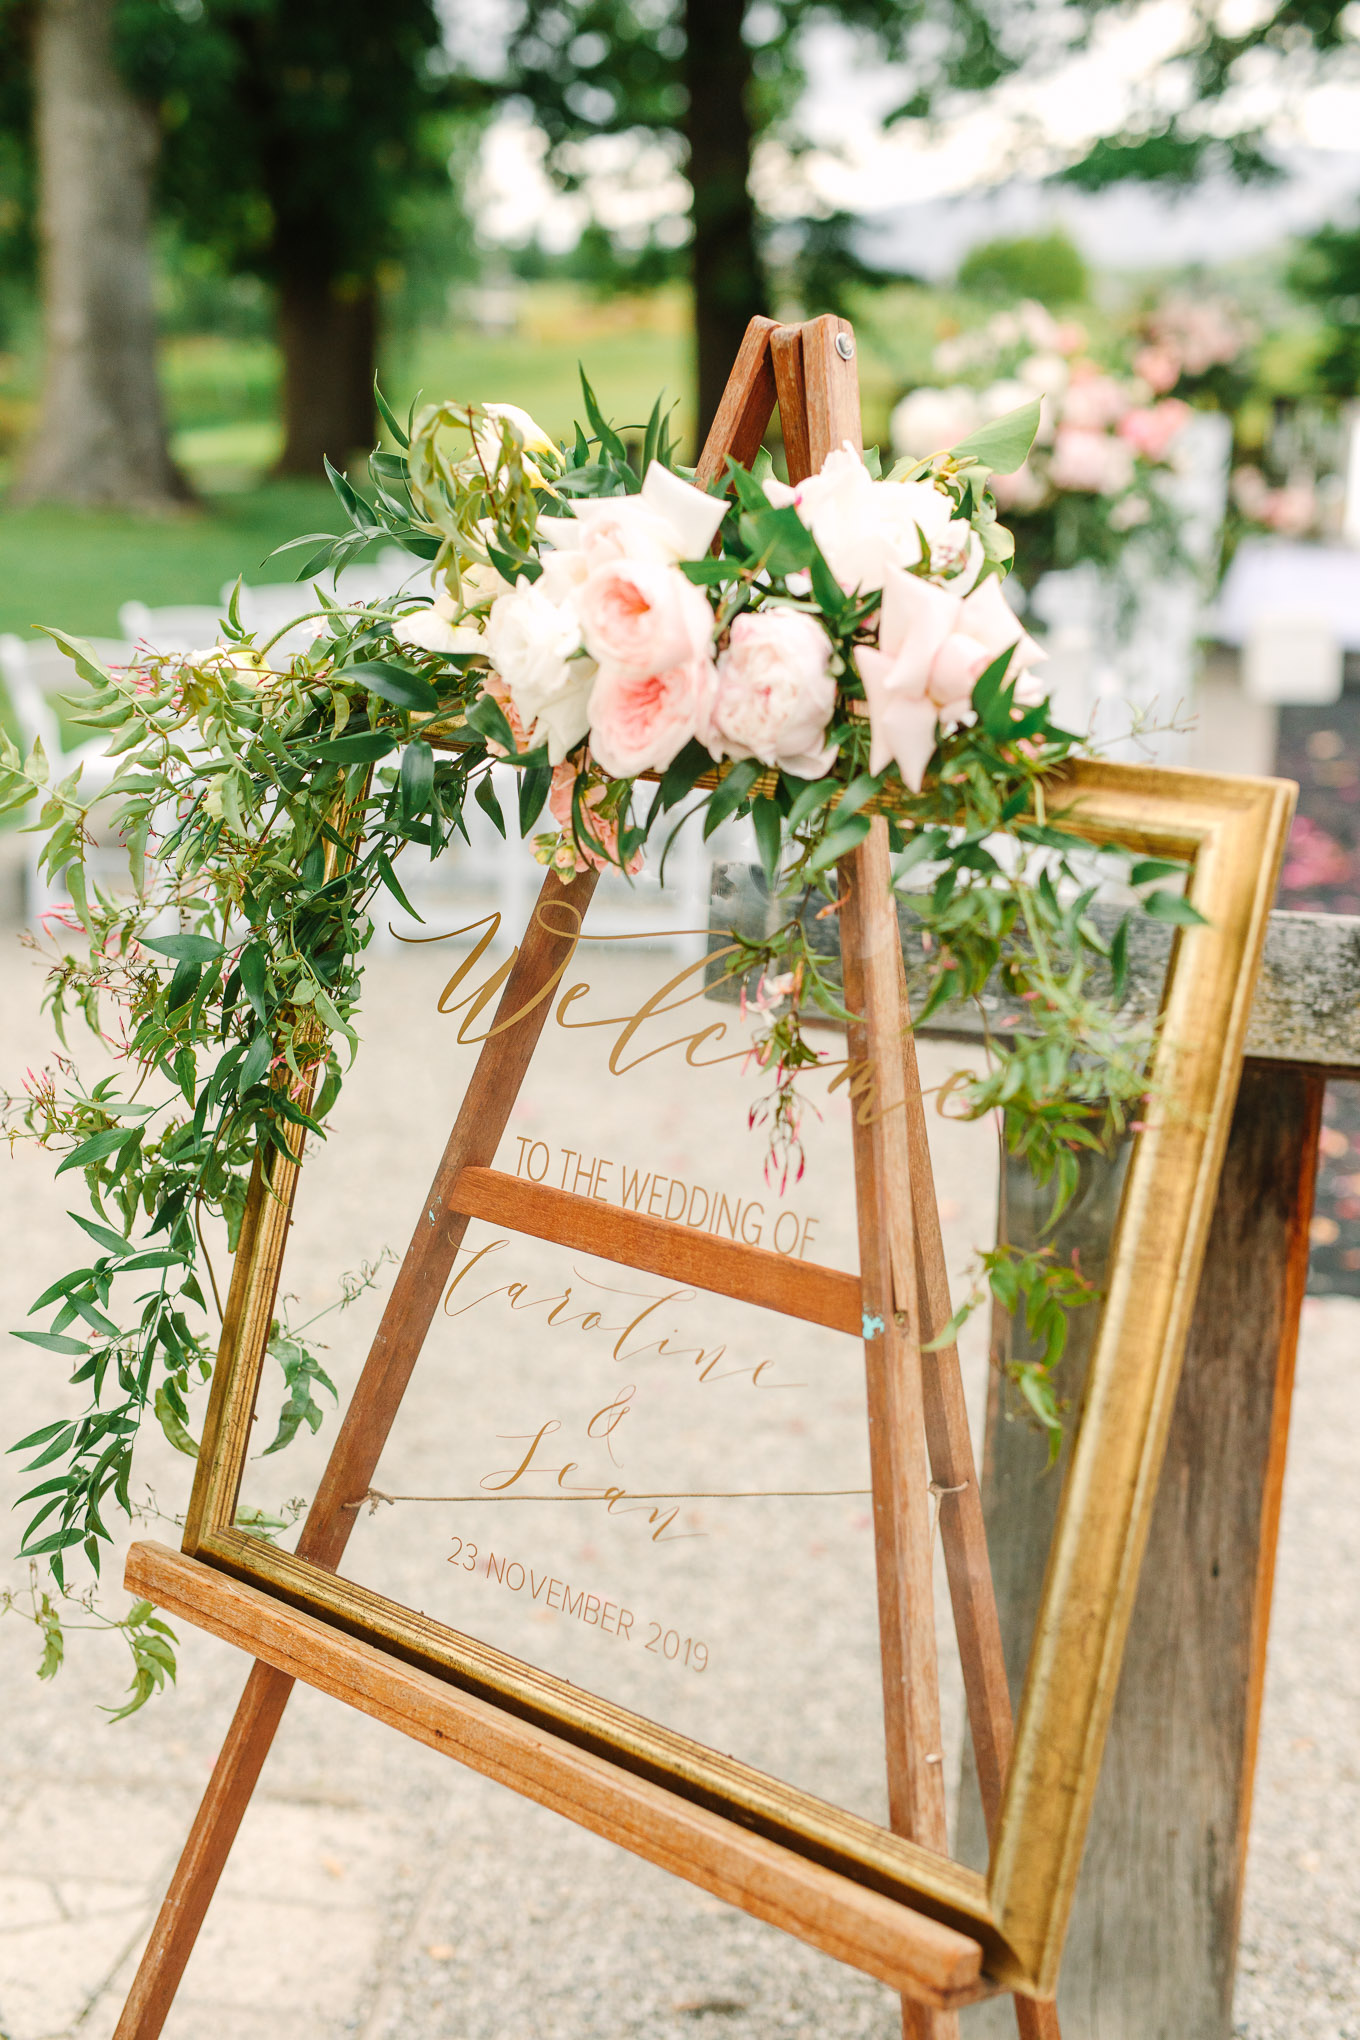 Calligraphy welcome frame with flowers at wedding ceremony. Millbrook Resort Queenstown New Zealand wedding by Mary Costa Photography | www.marycostaweddings.com